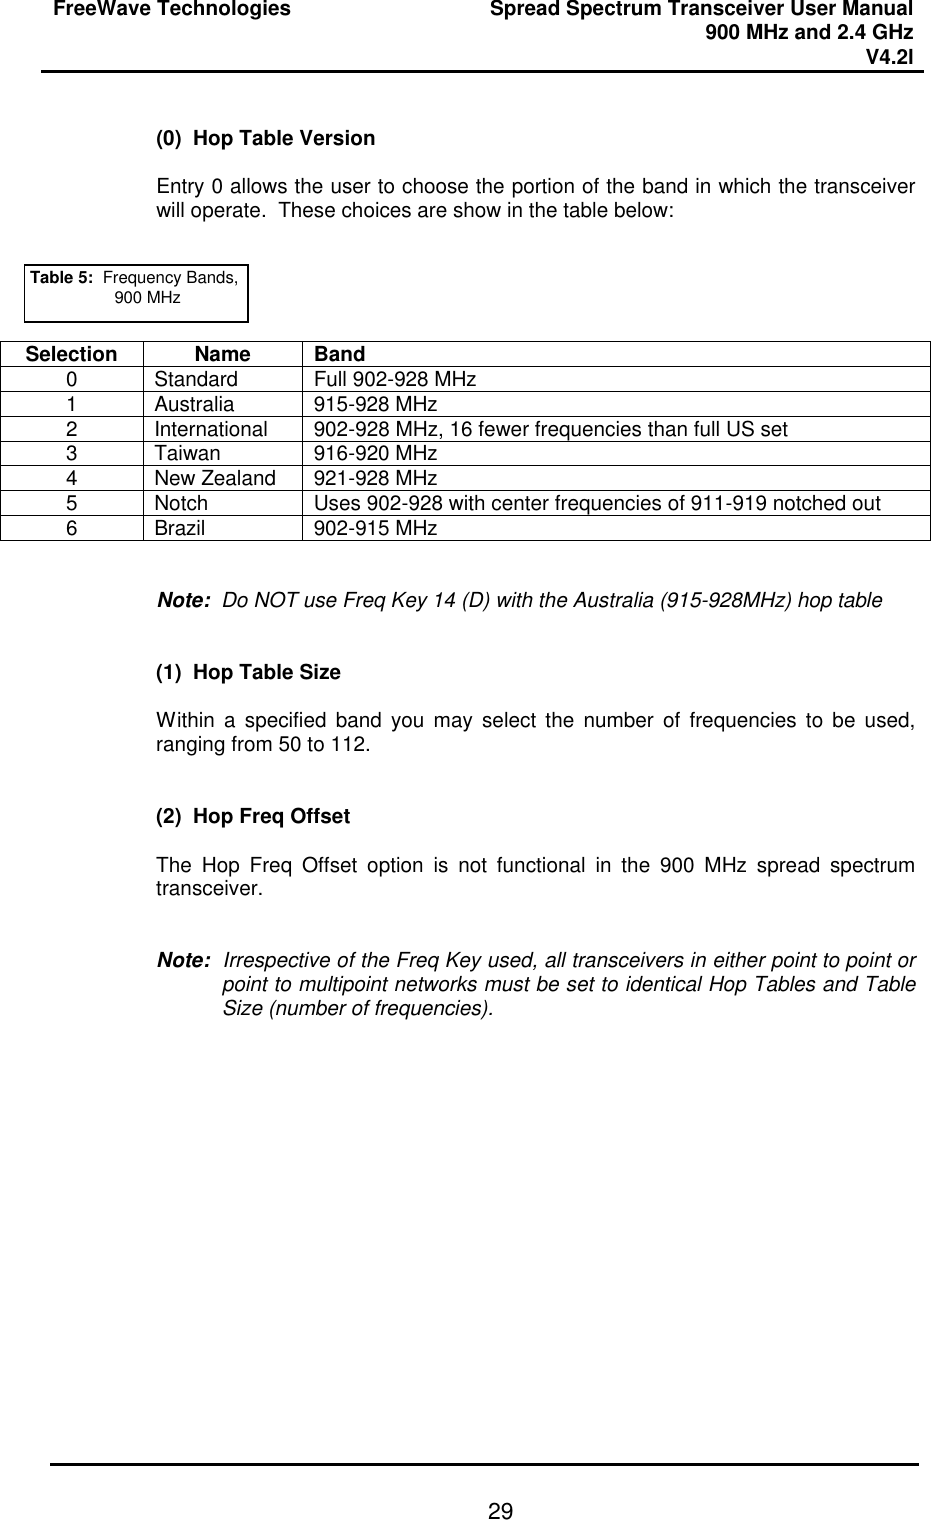 FreeWave Technologies Spread Spectrum Transceiver User Manual 900 MHz and 2.4 GHz V4.2l   29 (0)  Hop Table Version  Entry 0 allows the user to choose the portion of the band in which the transceiver will operate.  These choices are show in the table below:        Note:  Do NOT use Freq Key 14 (D) with the Australia (915-928MHz) hop table   (1)  Hop Table Size  Within a specified band you may select the number of frequencies to be used, ranging from 50 to 112.   (2)  Hop Freq Offset  The Hop Freq Offset option is not functional in the 900 MHz spread spectrum transceiver.   Note:  Irrespective of the Freq Key used, all transceivers in either point to point or point to multipoint networks must be set to identical Hop Tables and Table Size (number of frequencies).    Table 5:  Frequency Bands, 900 MHz Selection Name Band 0 Standard Full 902-928 MHz 1 Australia 915-928 MHz 2 International 902-928 MHz, 16 fewer frequencies than full US set 3 Taiwan 916-920 MHz 4 New Zealand 921-928 MHz 5 Notch Uses 902-928 with center frequencies of 911-919 notched out 6 Brazil 902-915 MHz 